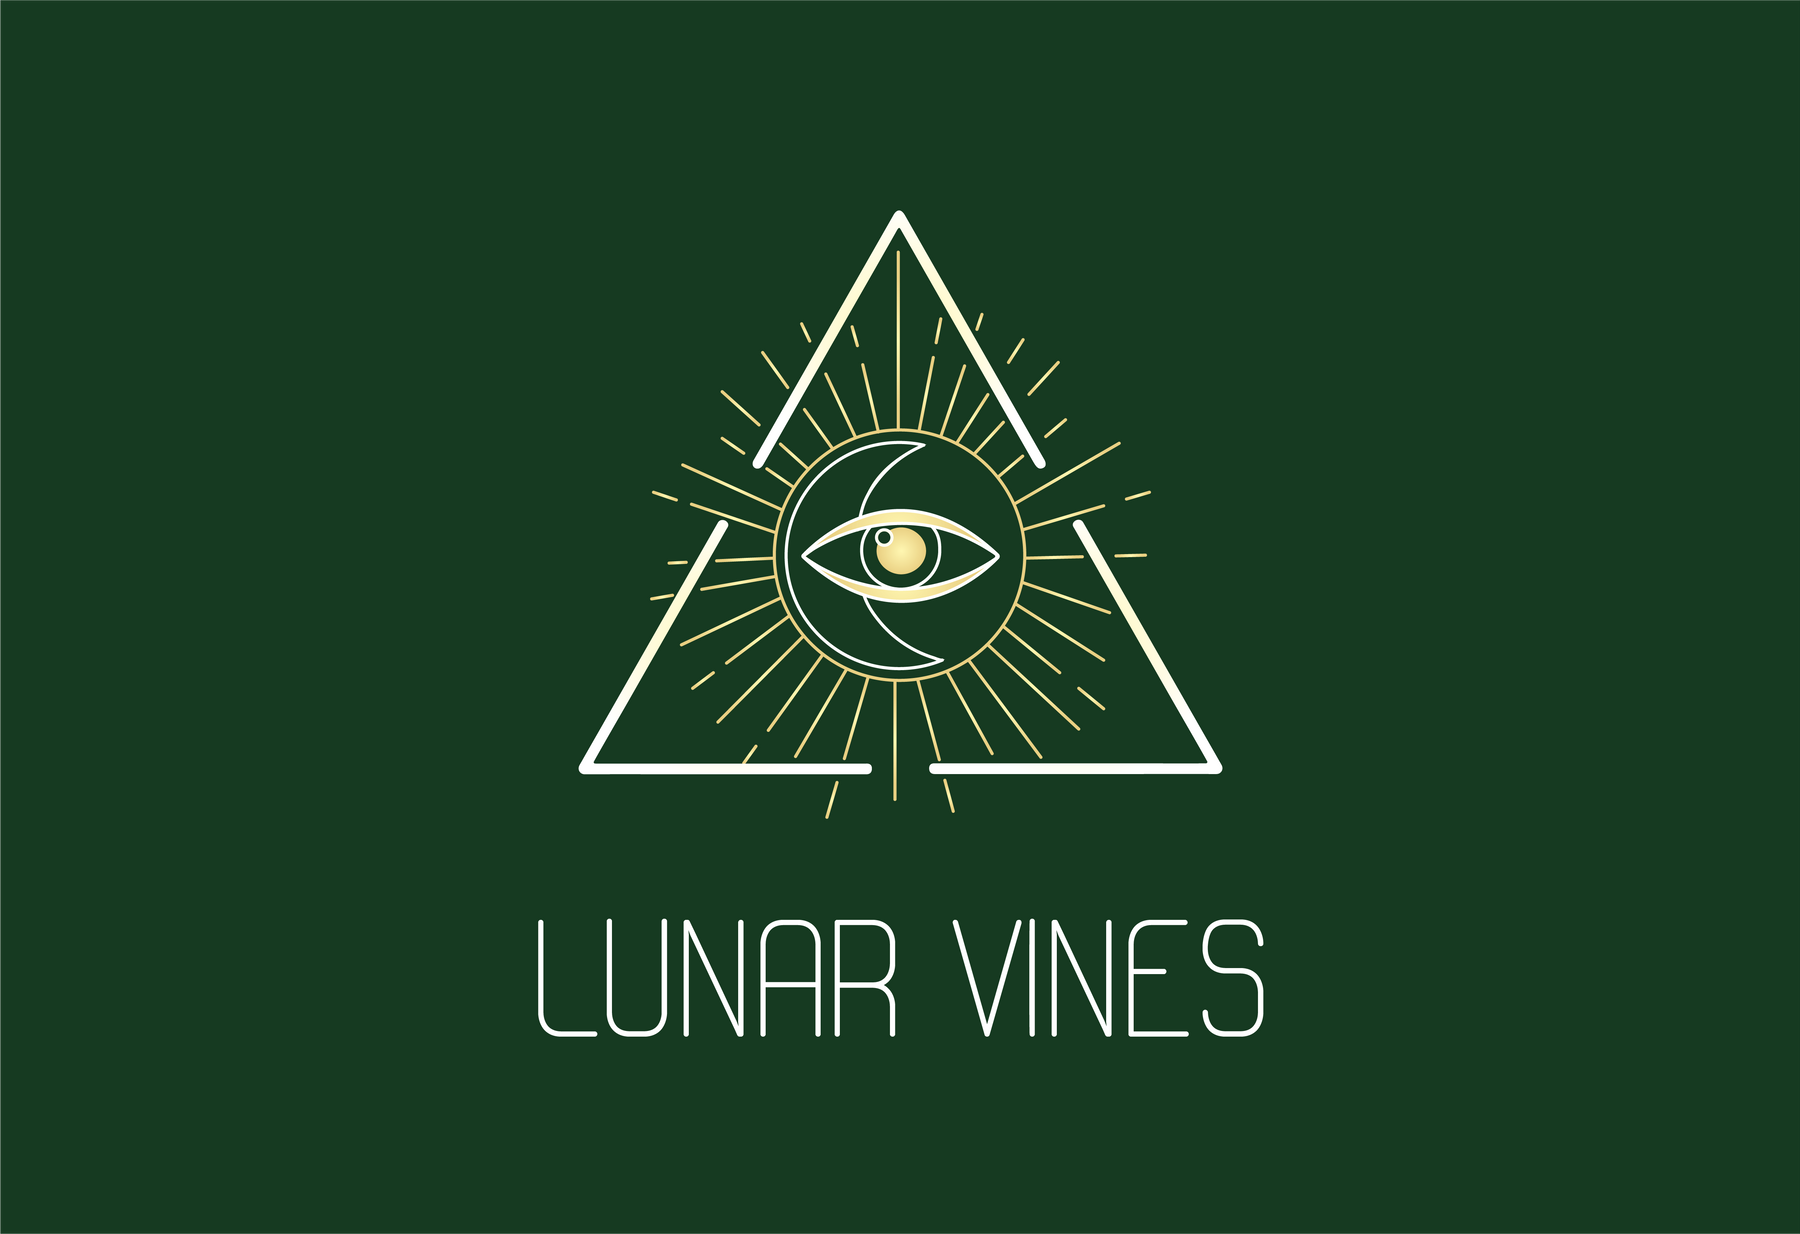 LUNAR VINES IS A NEW JEWELRY BRAND